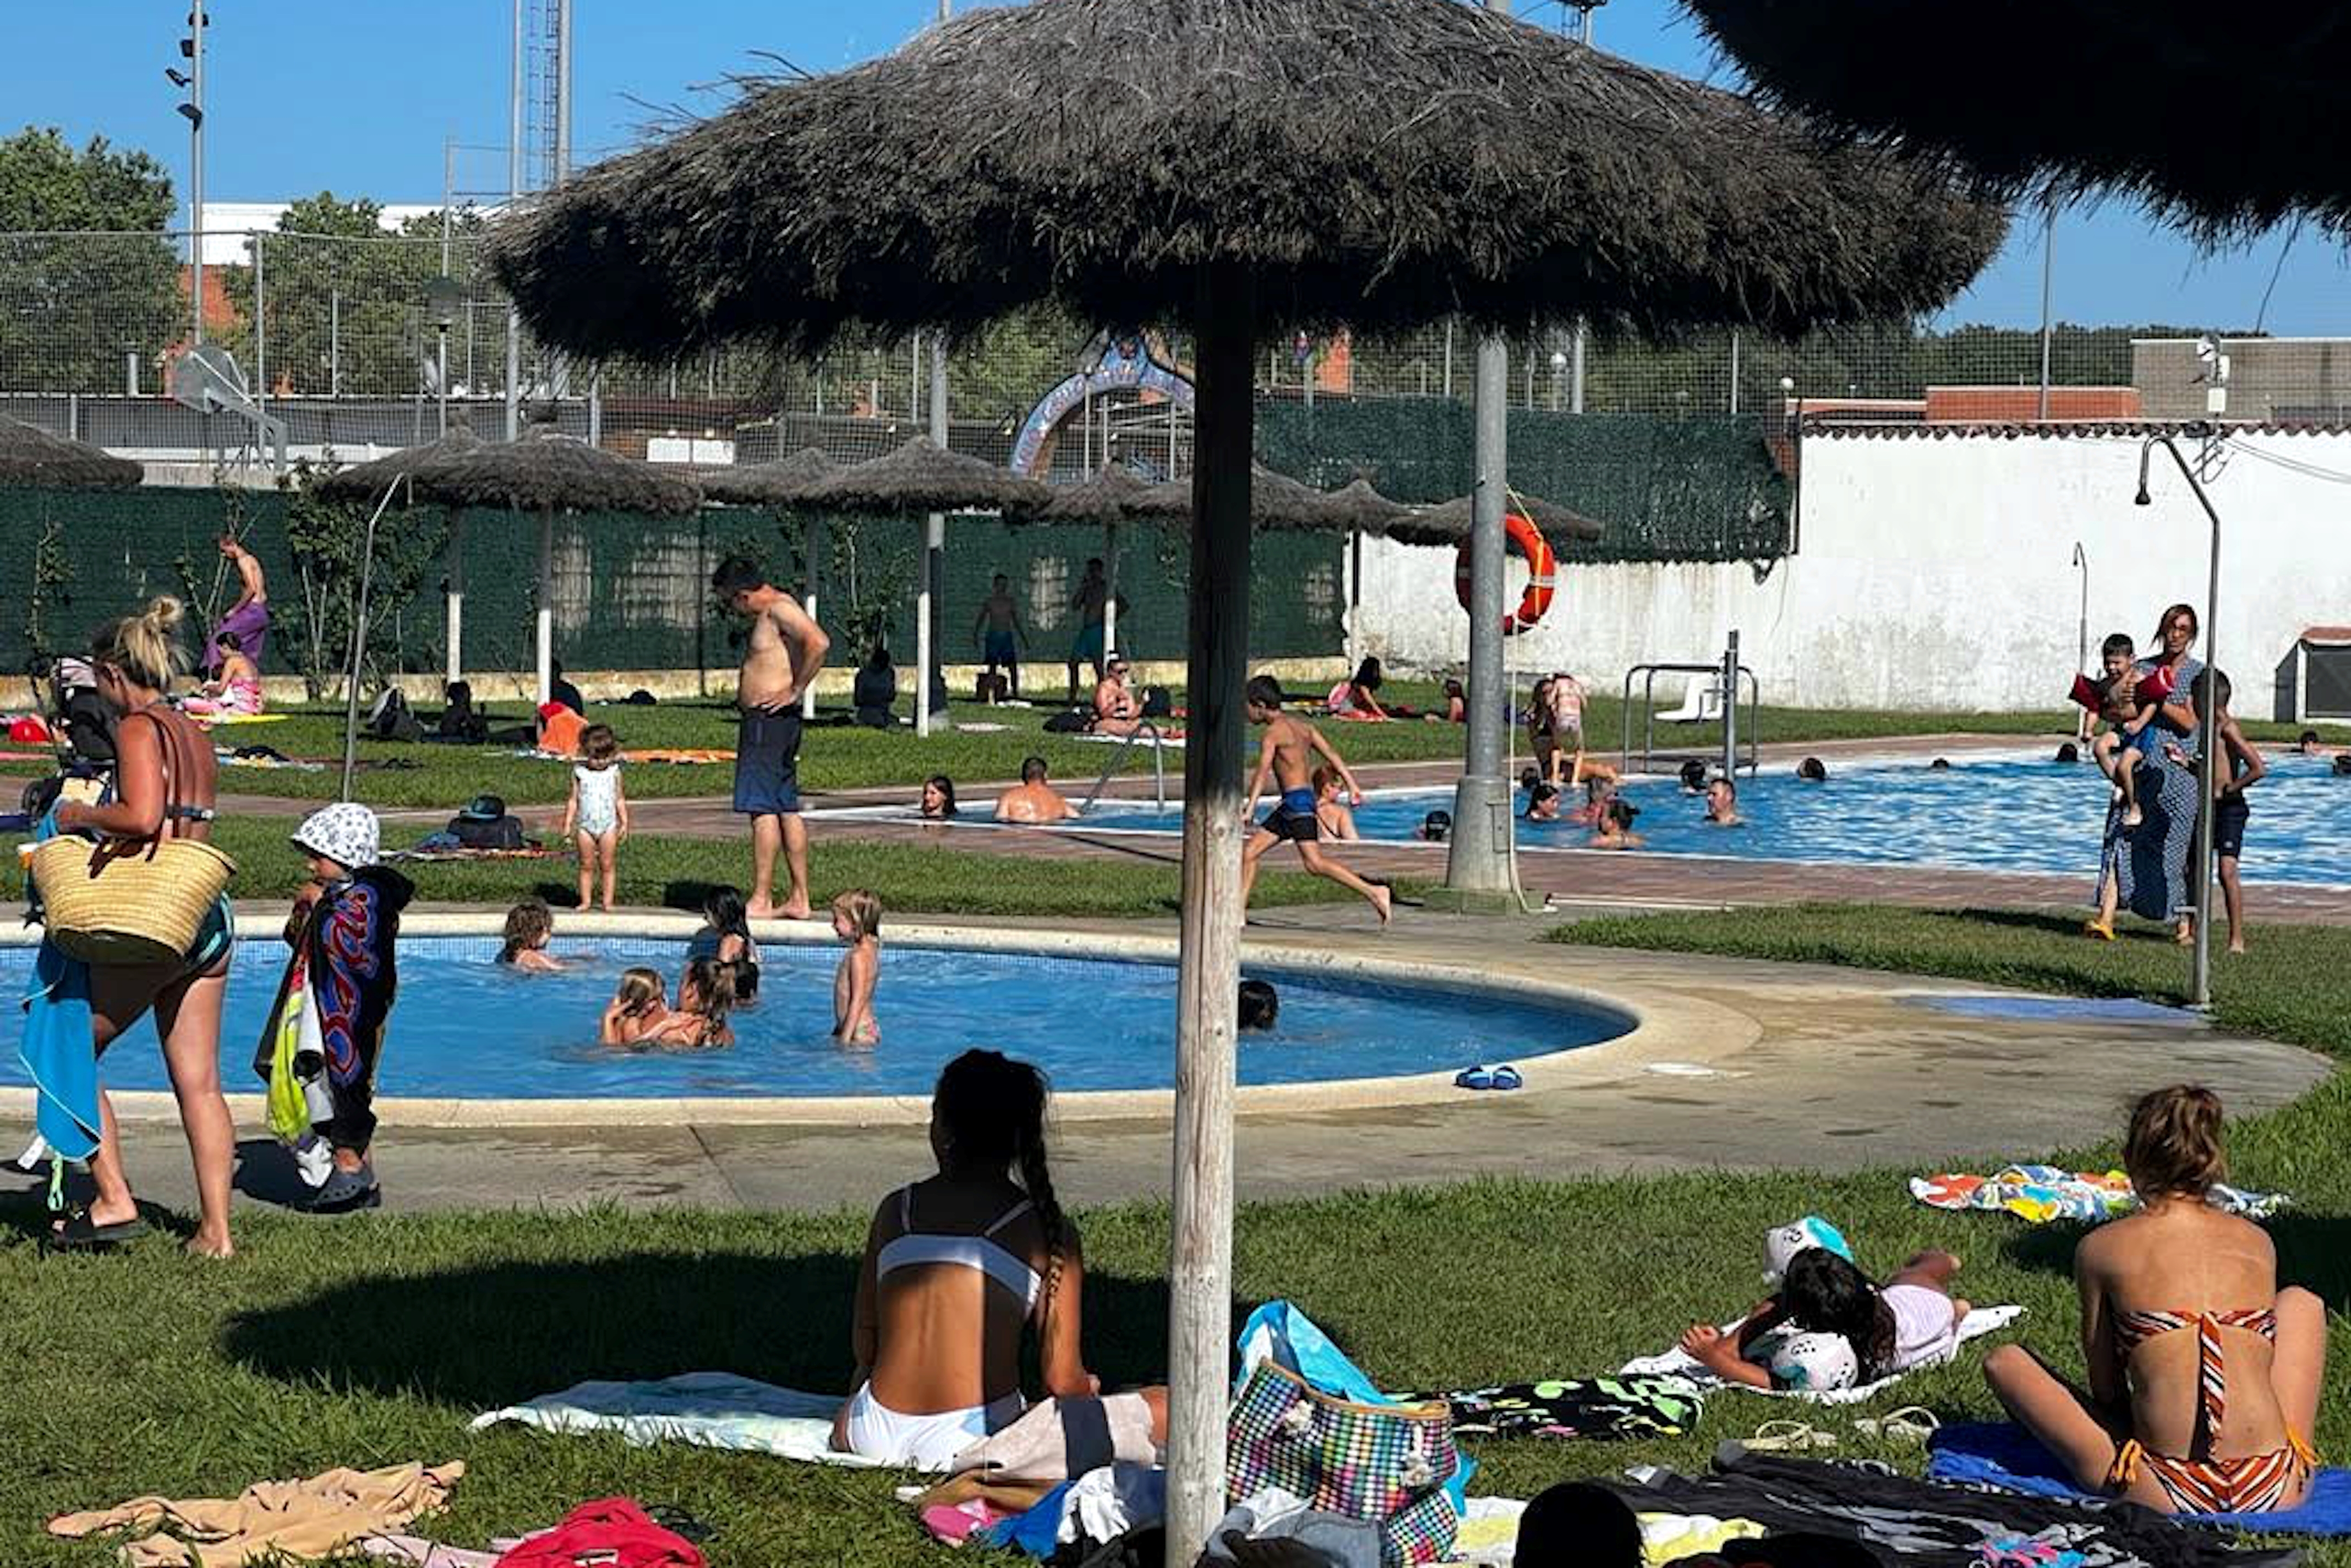 Llagostera's public swimming pool offers free entrance during the 2022 July heatwave in Catalonia